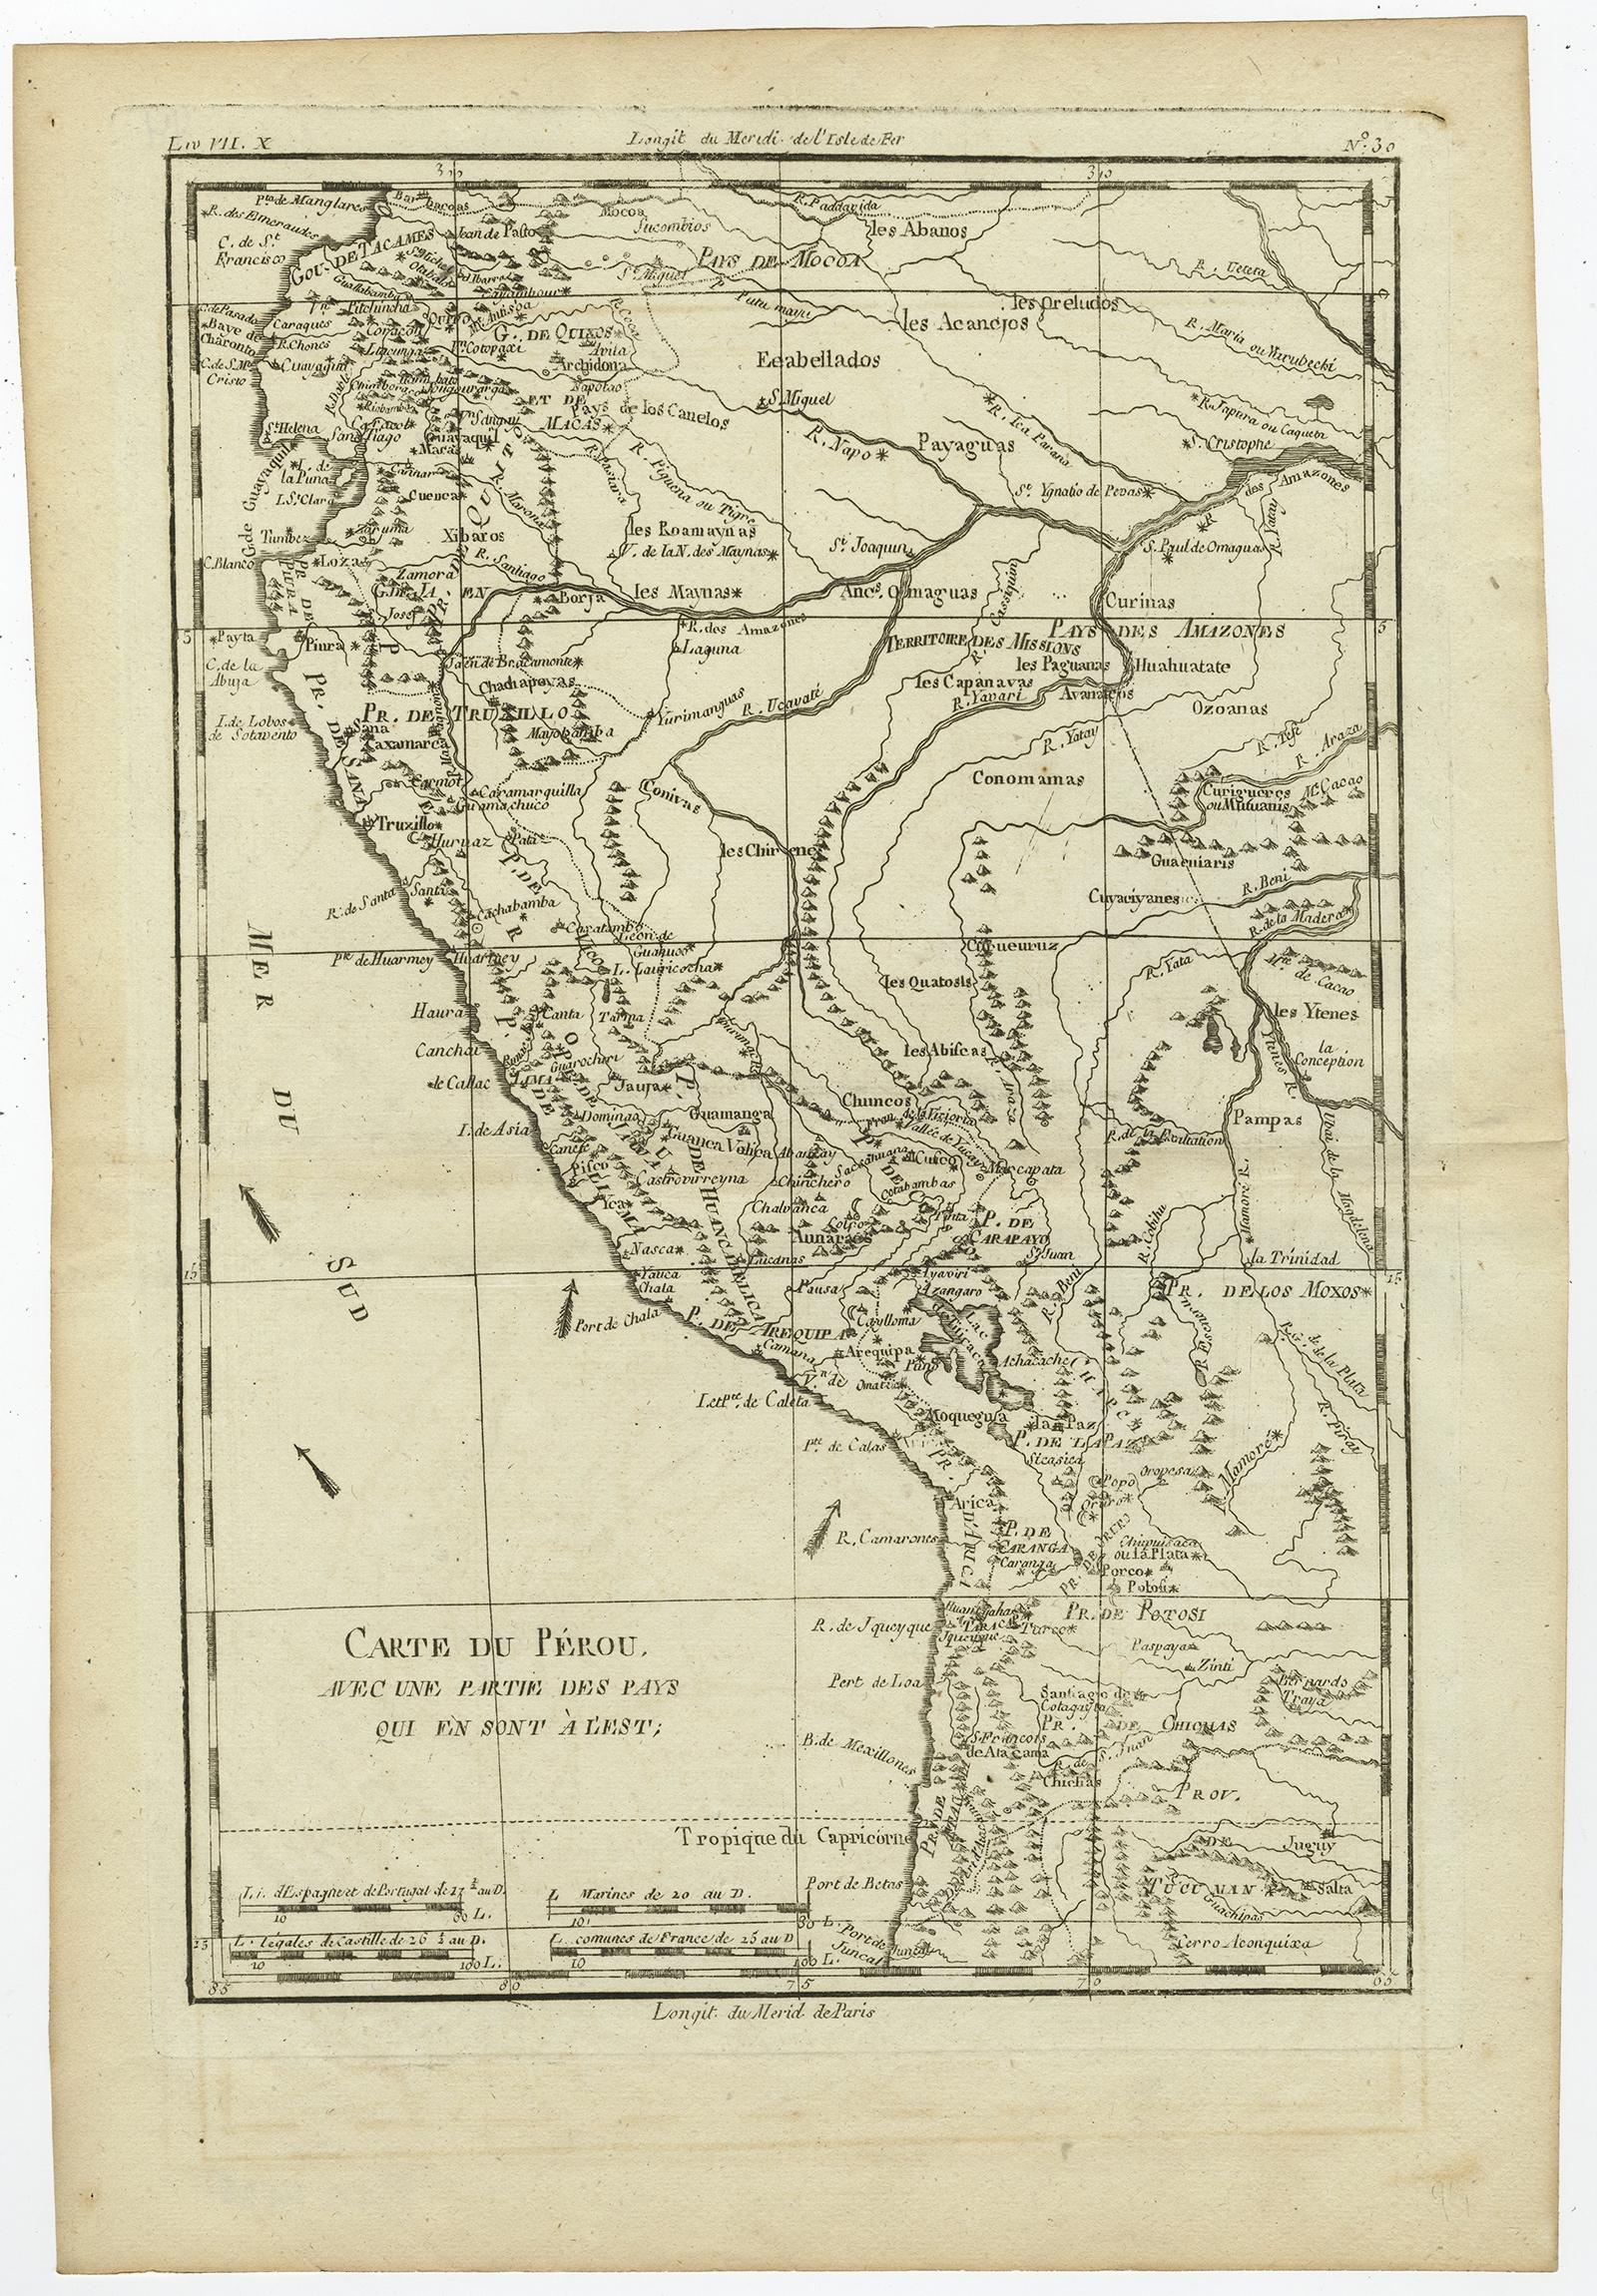 Antique map titled 'Carte du Perou avec une partie des pays qui en sont a l'est.' 

Map of the western coast of South America extending from Ecuador, through Peru and present-day Bolivia, into northern Chili. Nice detailed map with the locations